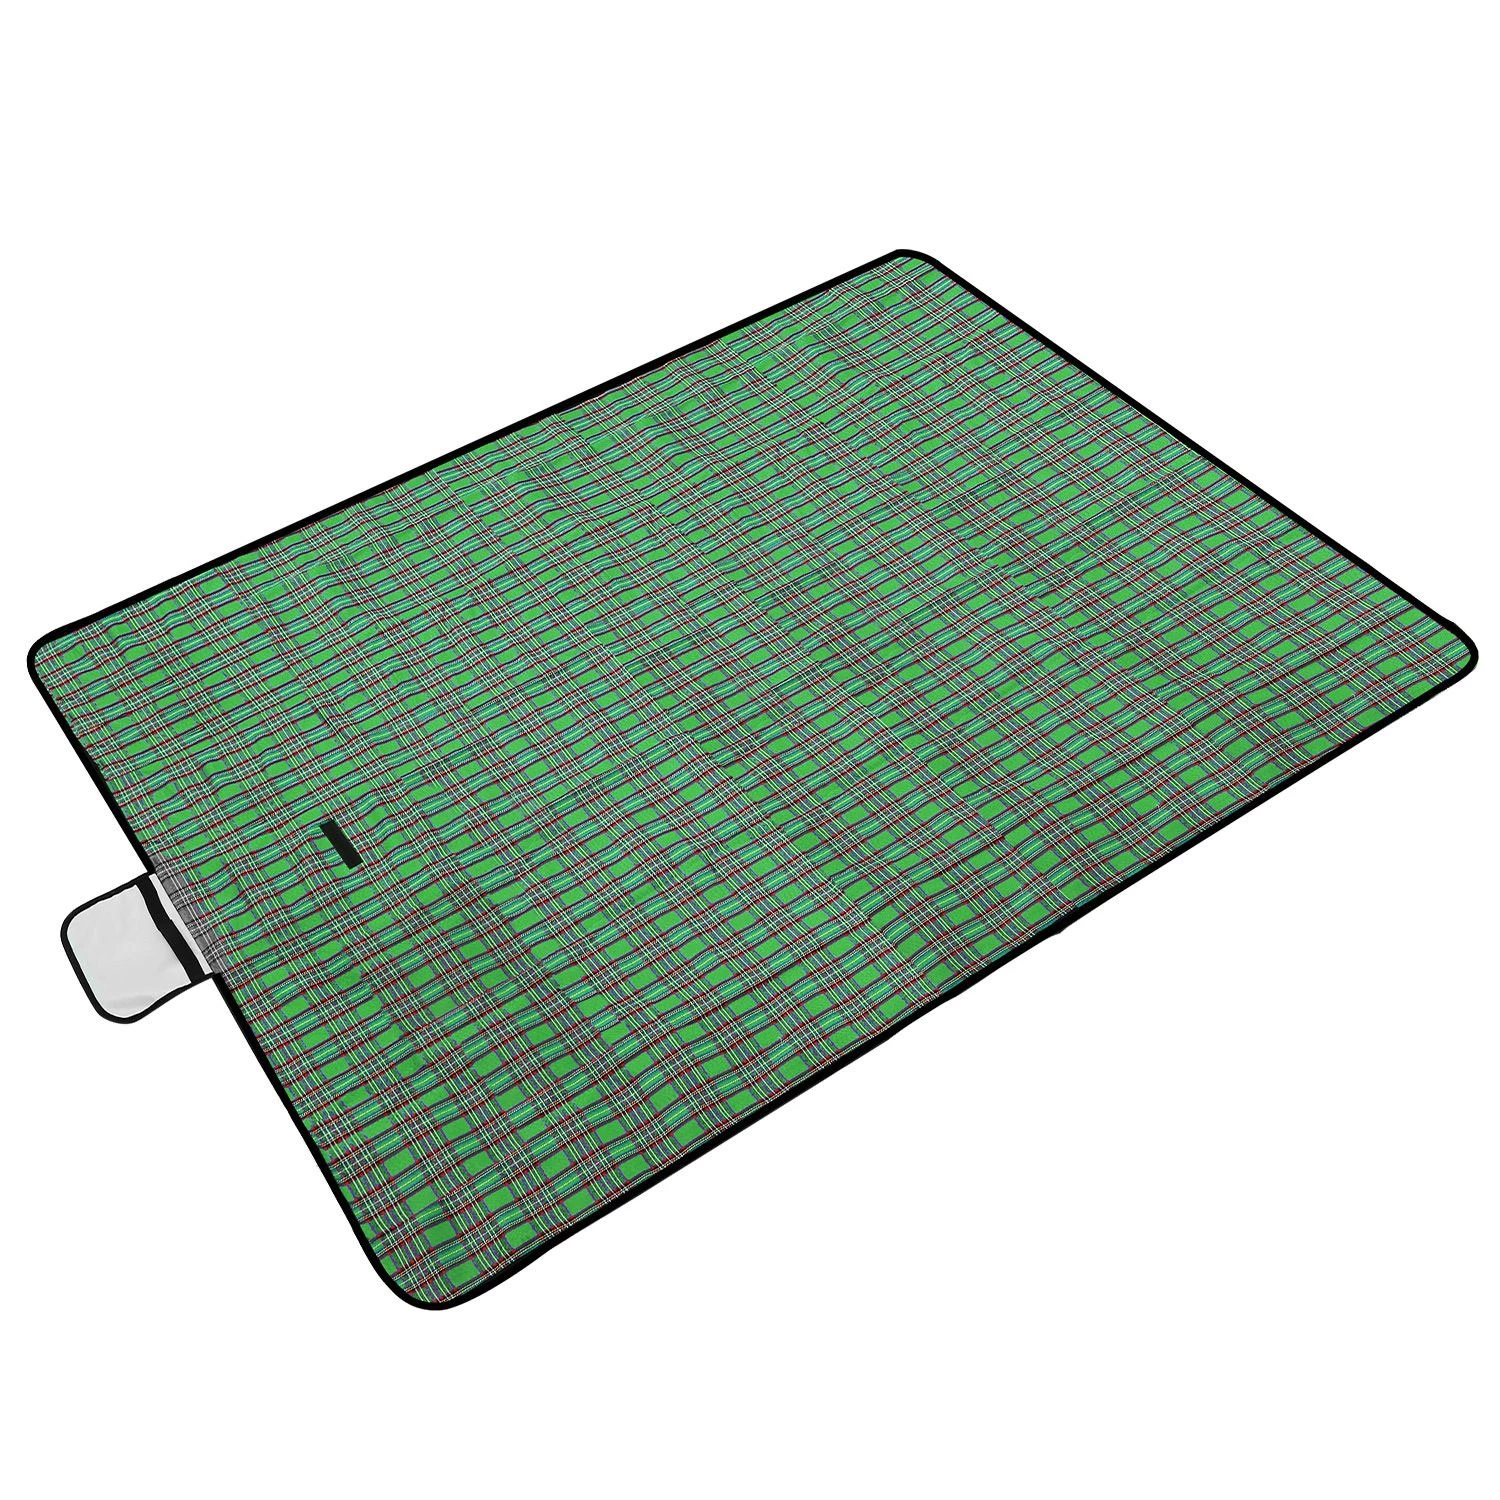 60" x 78" Waterproof Picnic Blanket Handy Mat with Strap Foldable Camping Rug for Camping Hiking Gra